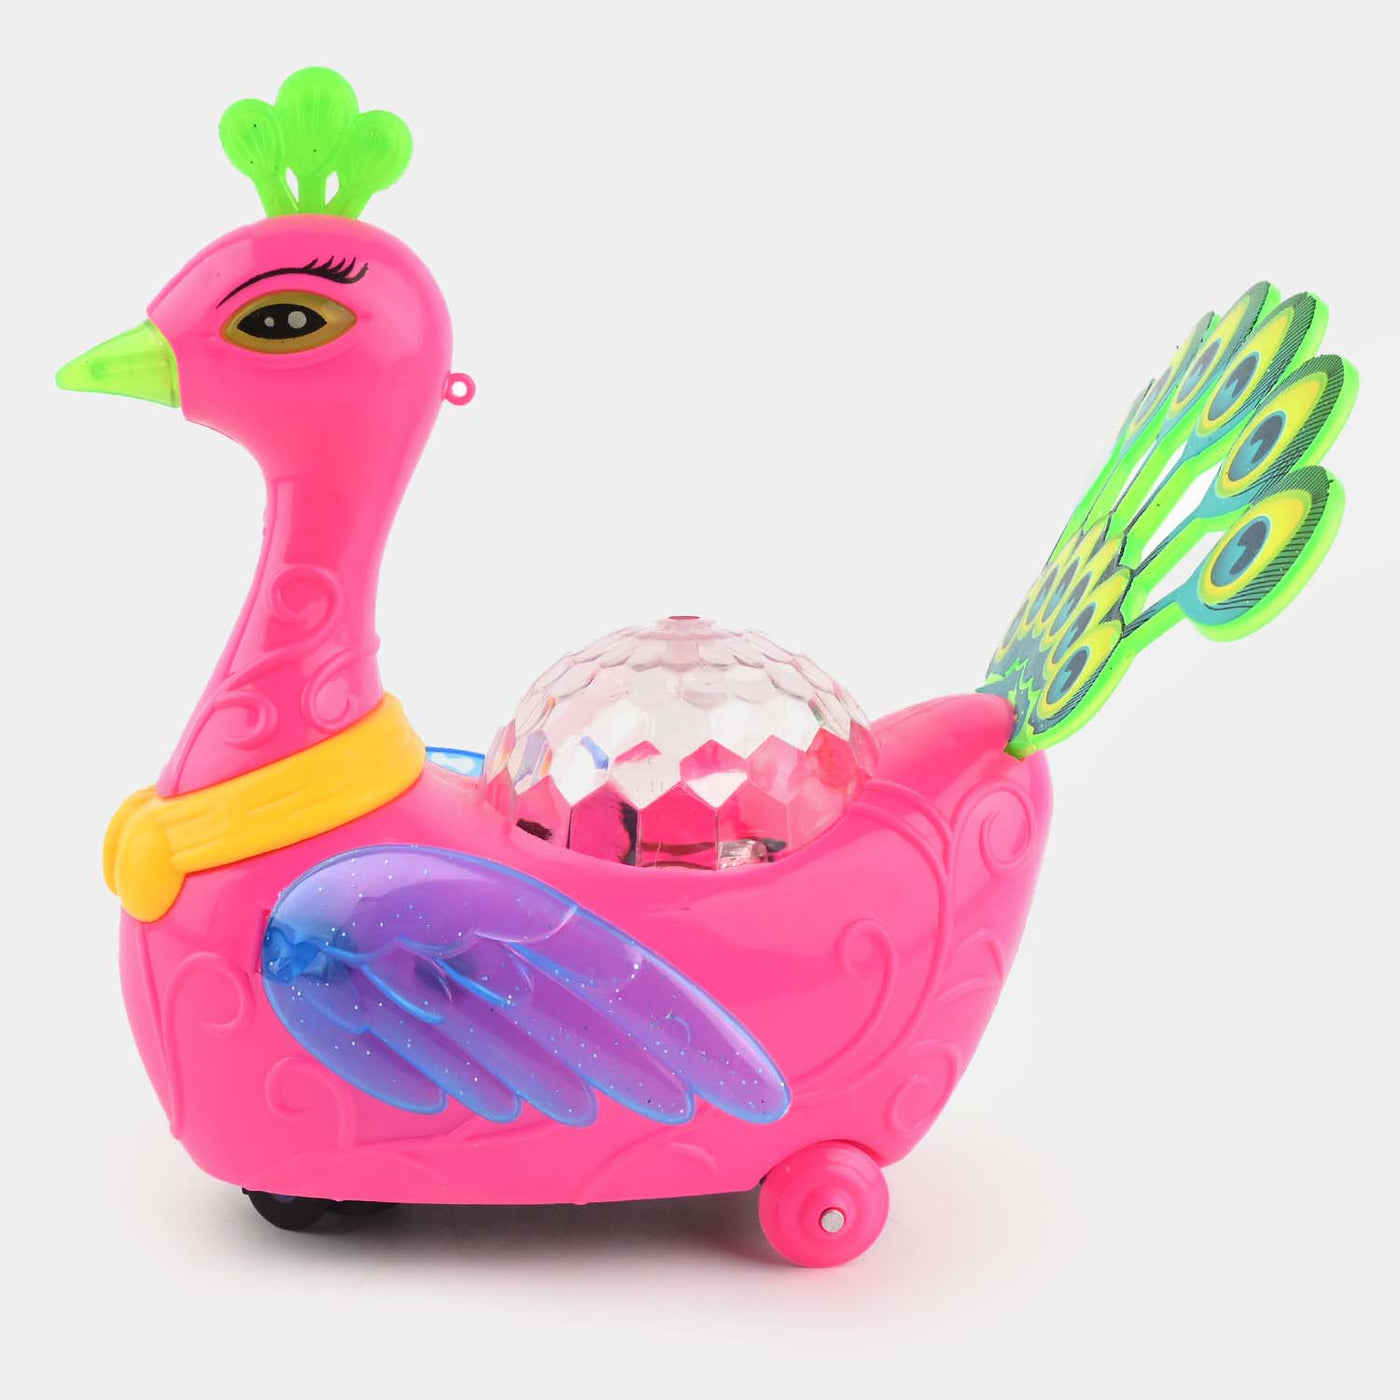 Light & Musical Peacock Toy For Kids